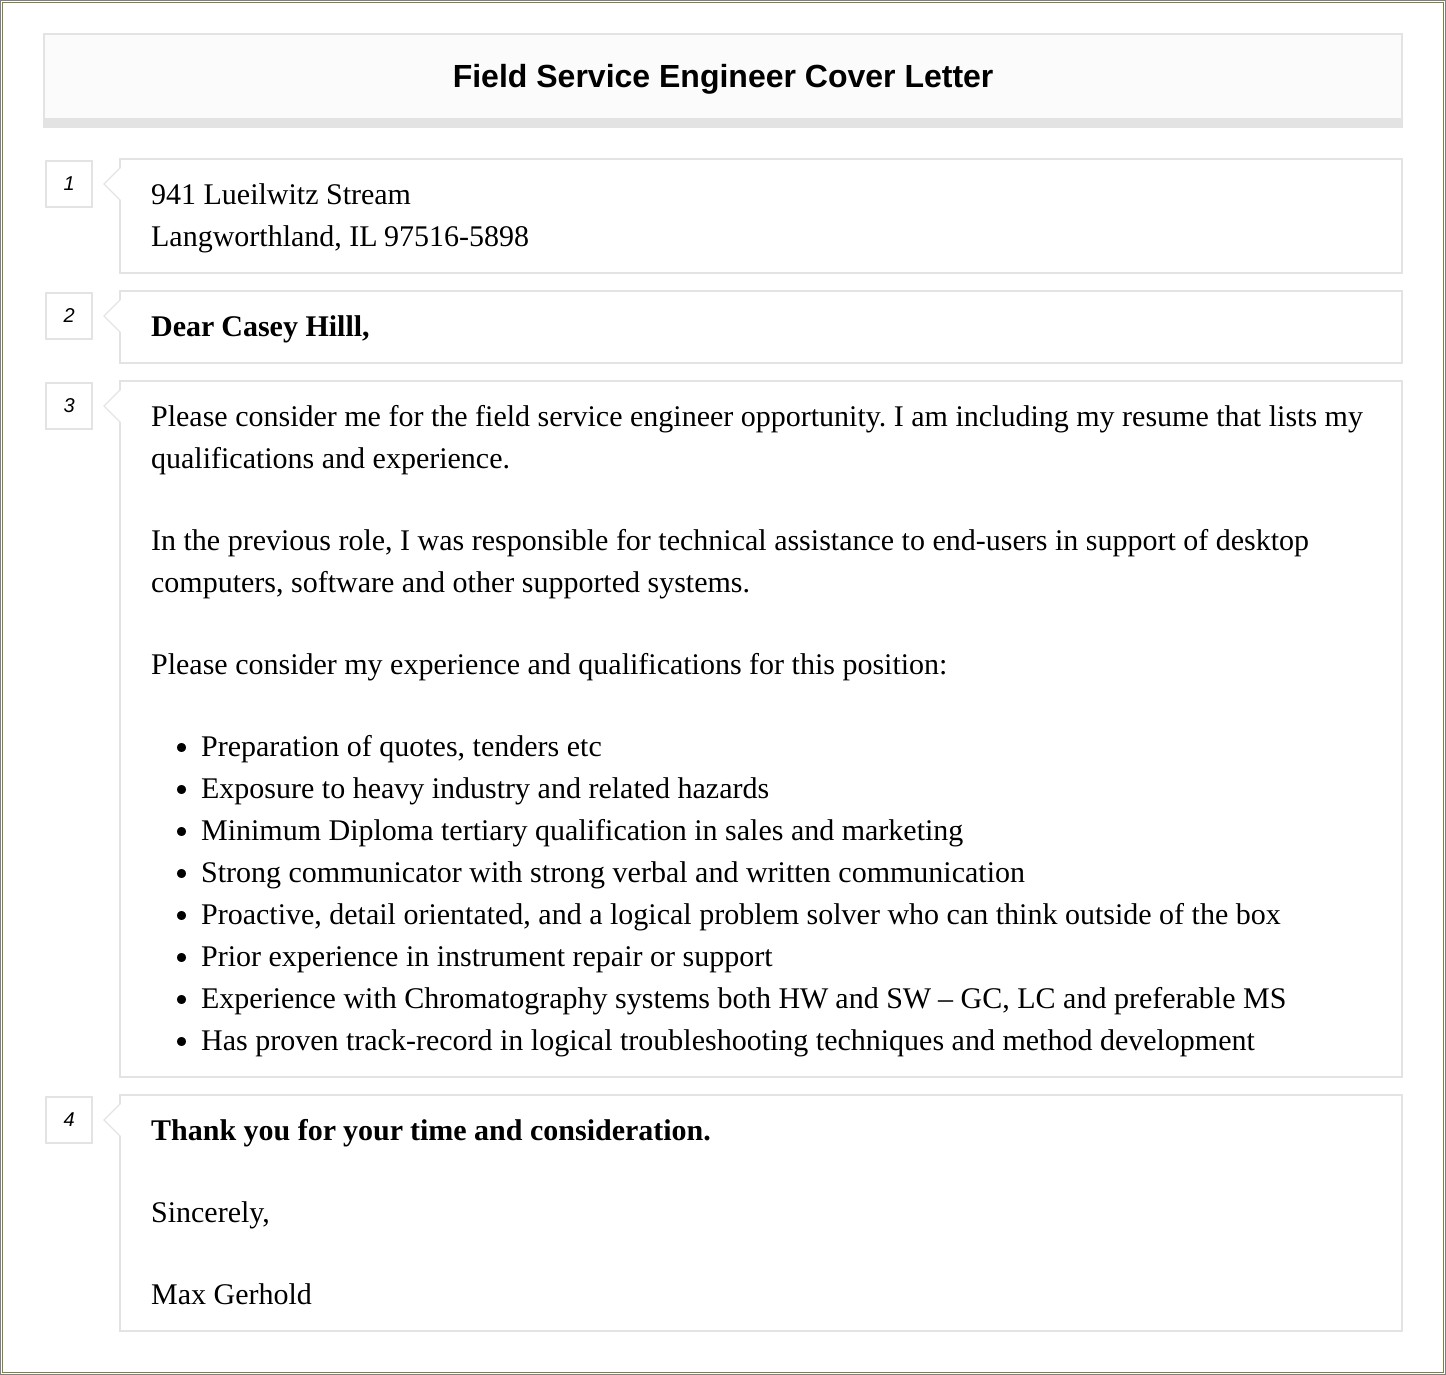 Field Service Engineer Resume Cover Letter